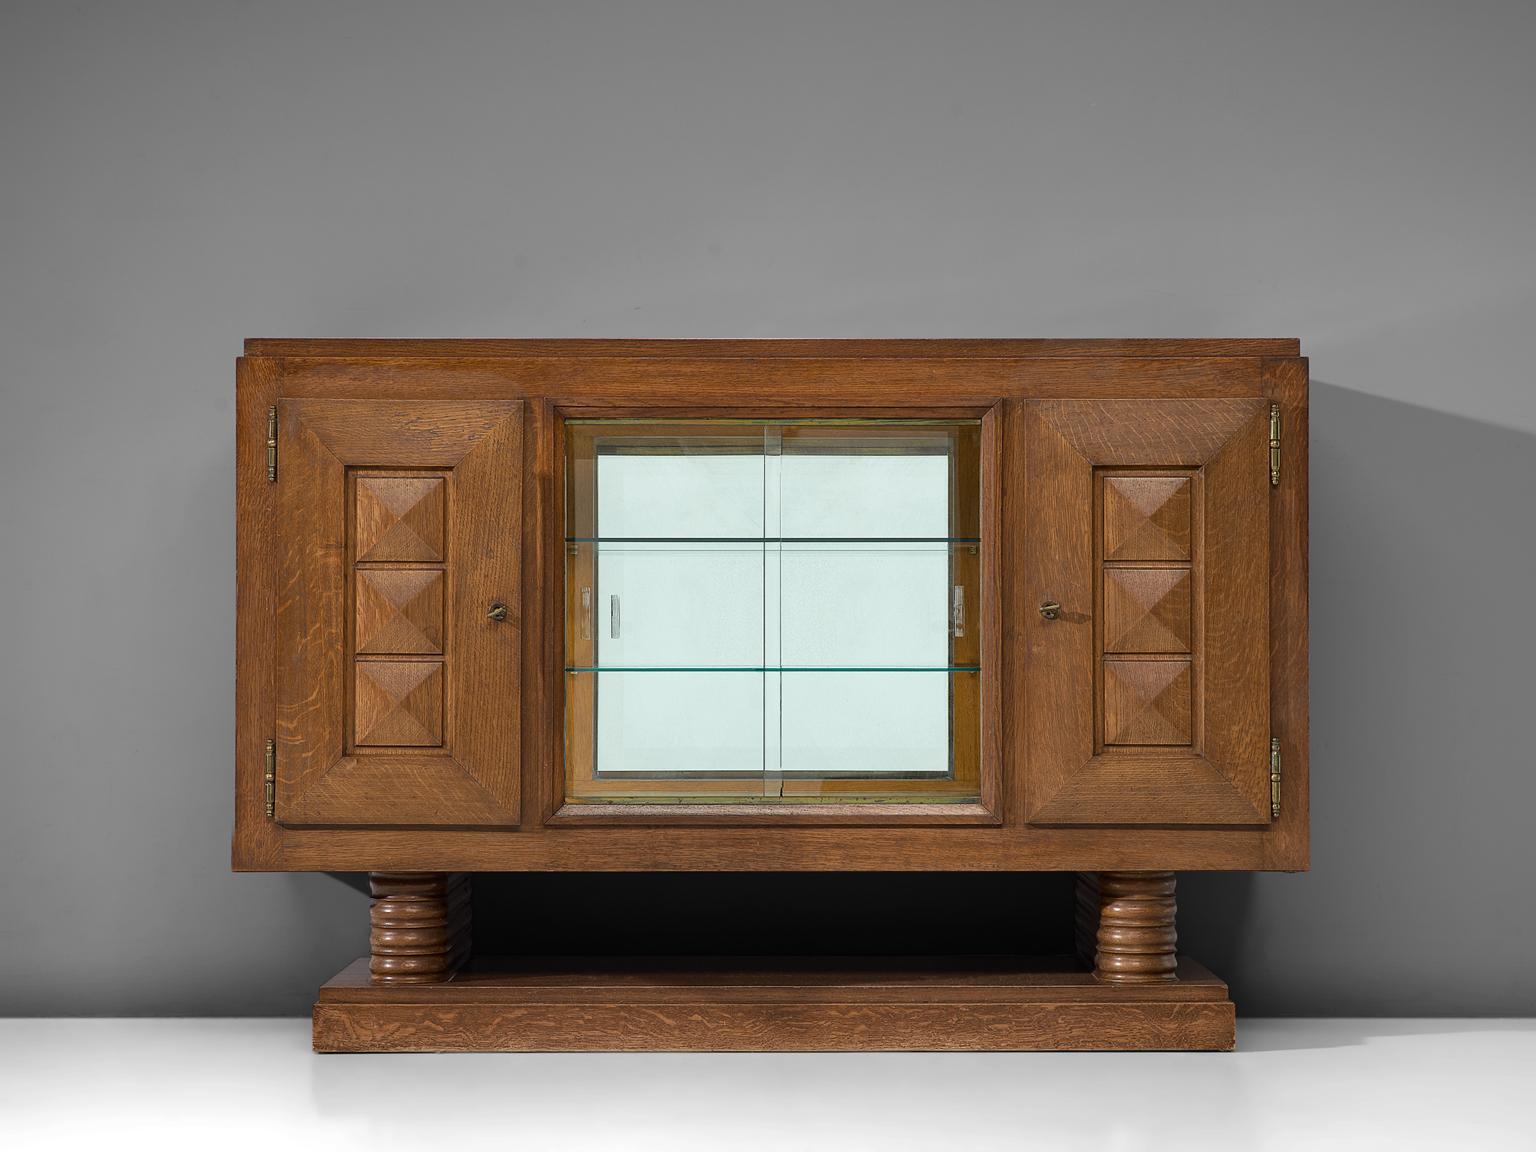 Gaston Poisson, credenza, stained oak, mirror and glass, France 1930s. 

Sturdy credenza in oak with graphical doorpanels and glass middle section. This sideboard is equipped with several shelves which provide plenty of storage space. The shelves